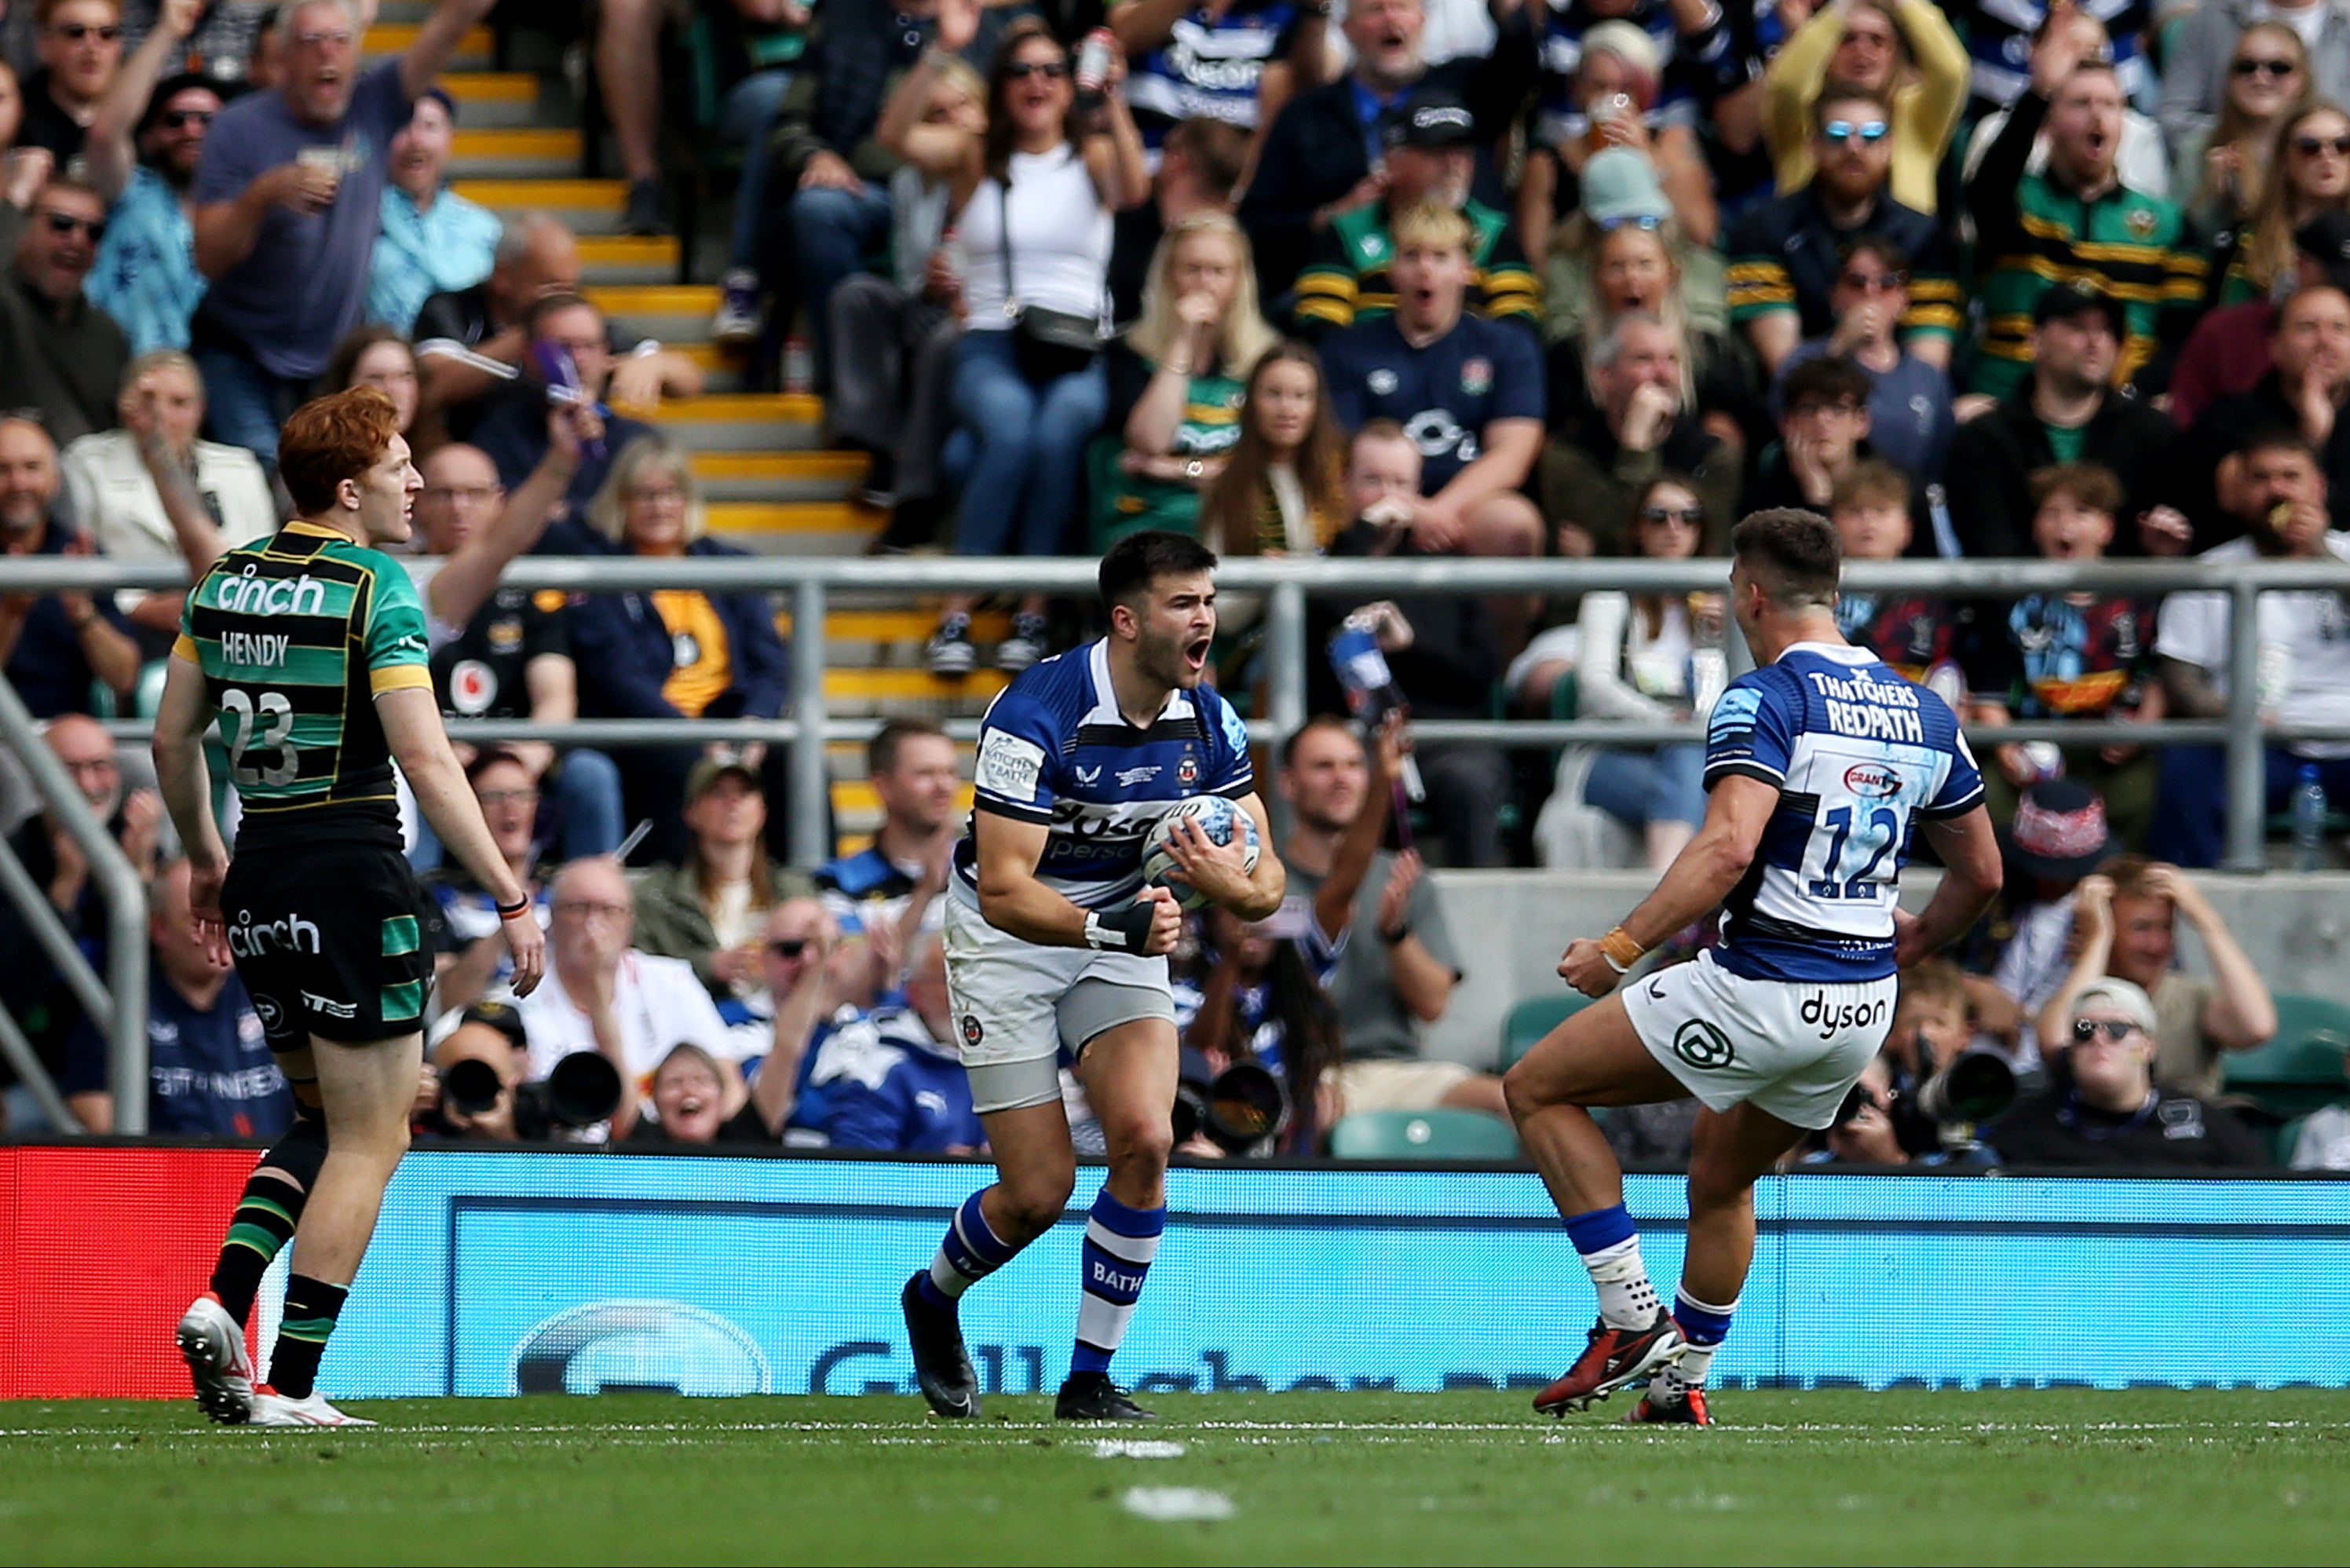 Will Muir’s try gave Bath real hope